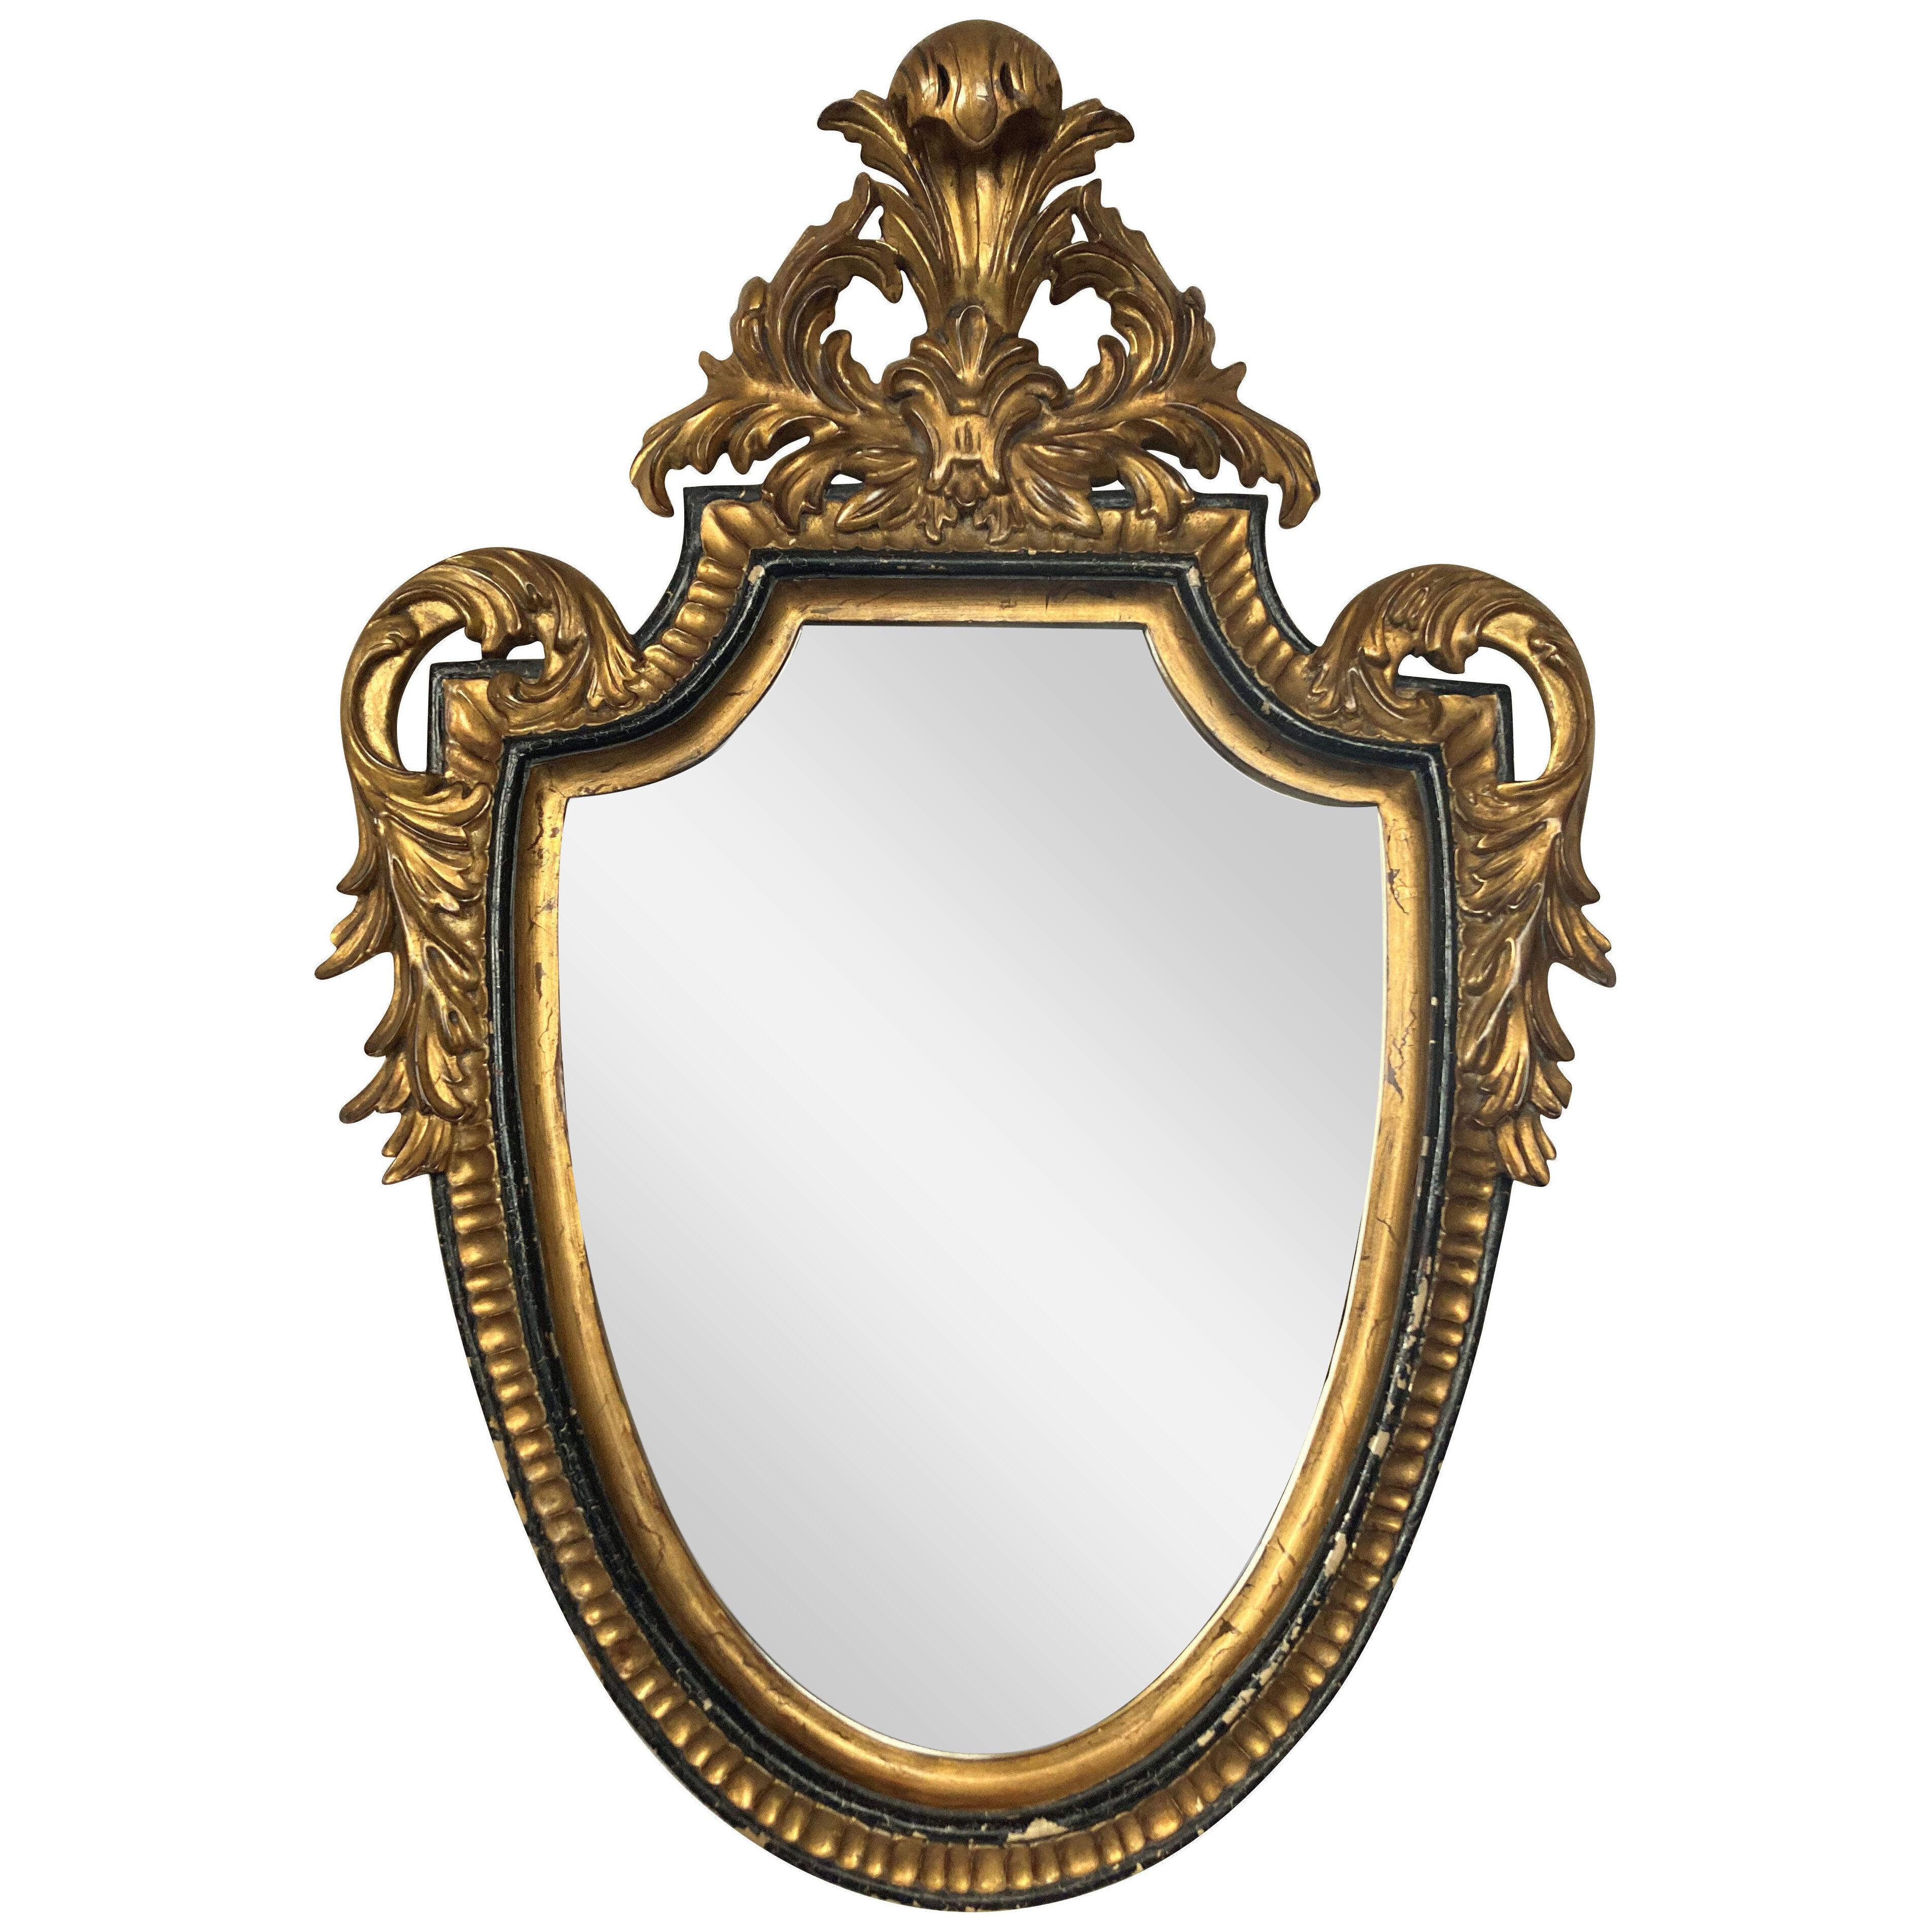 A LOUIS XV STYLE GILT WOOD MIRROR BY DAUPHINE